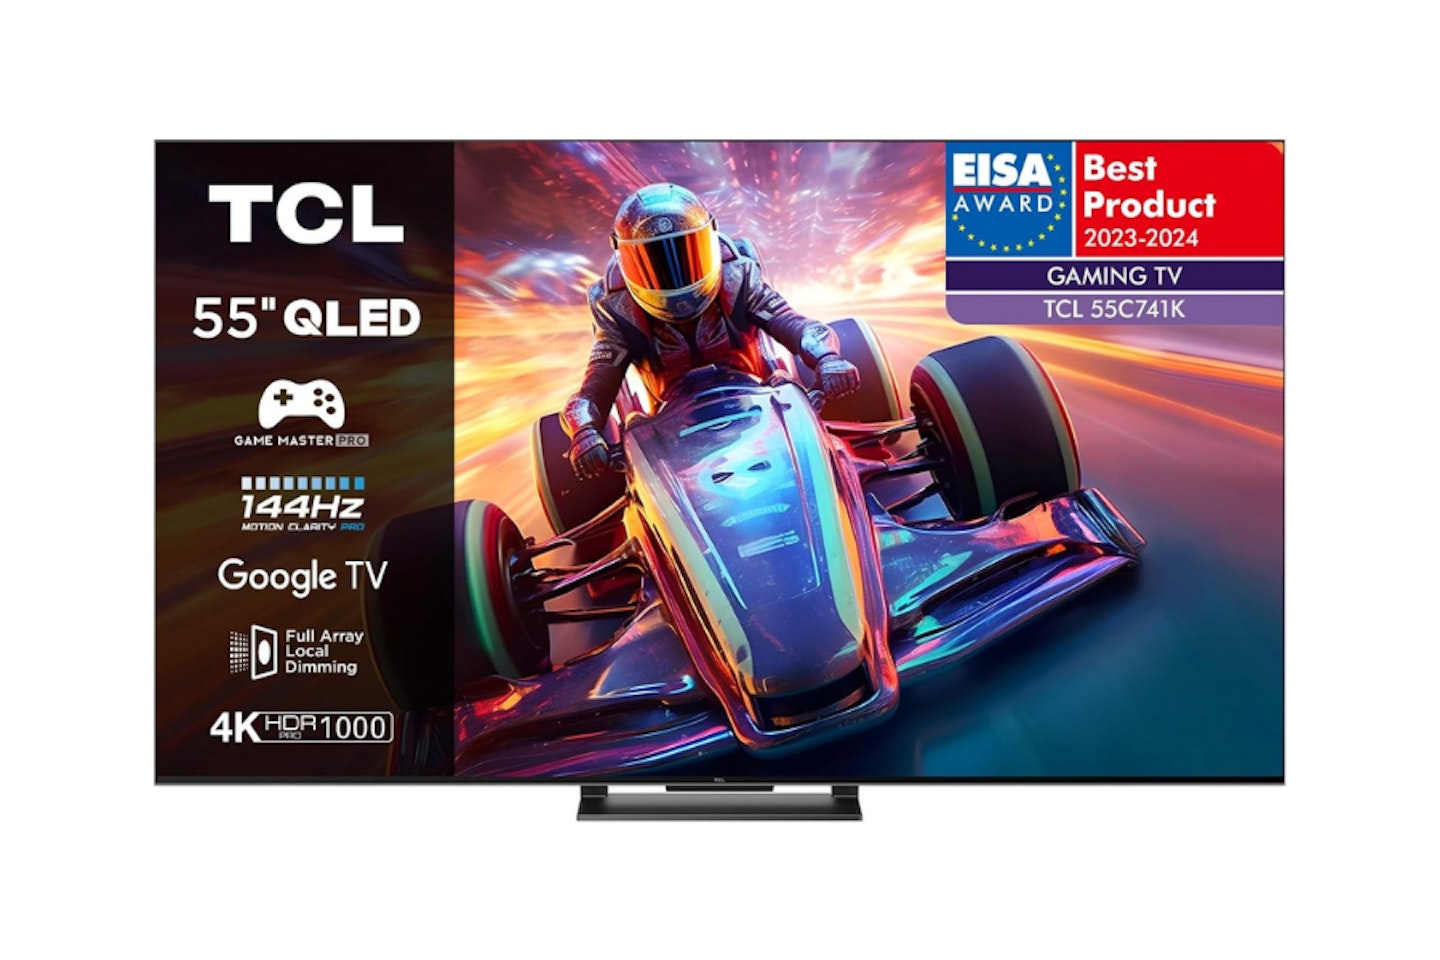 TCL 55C741K 55-inch QLED Television